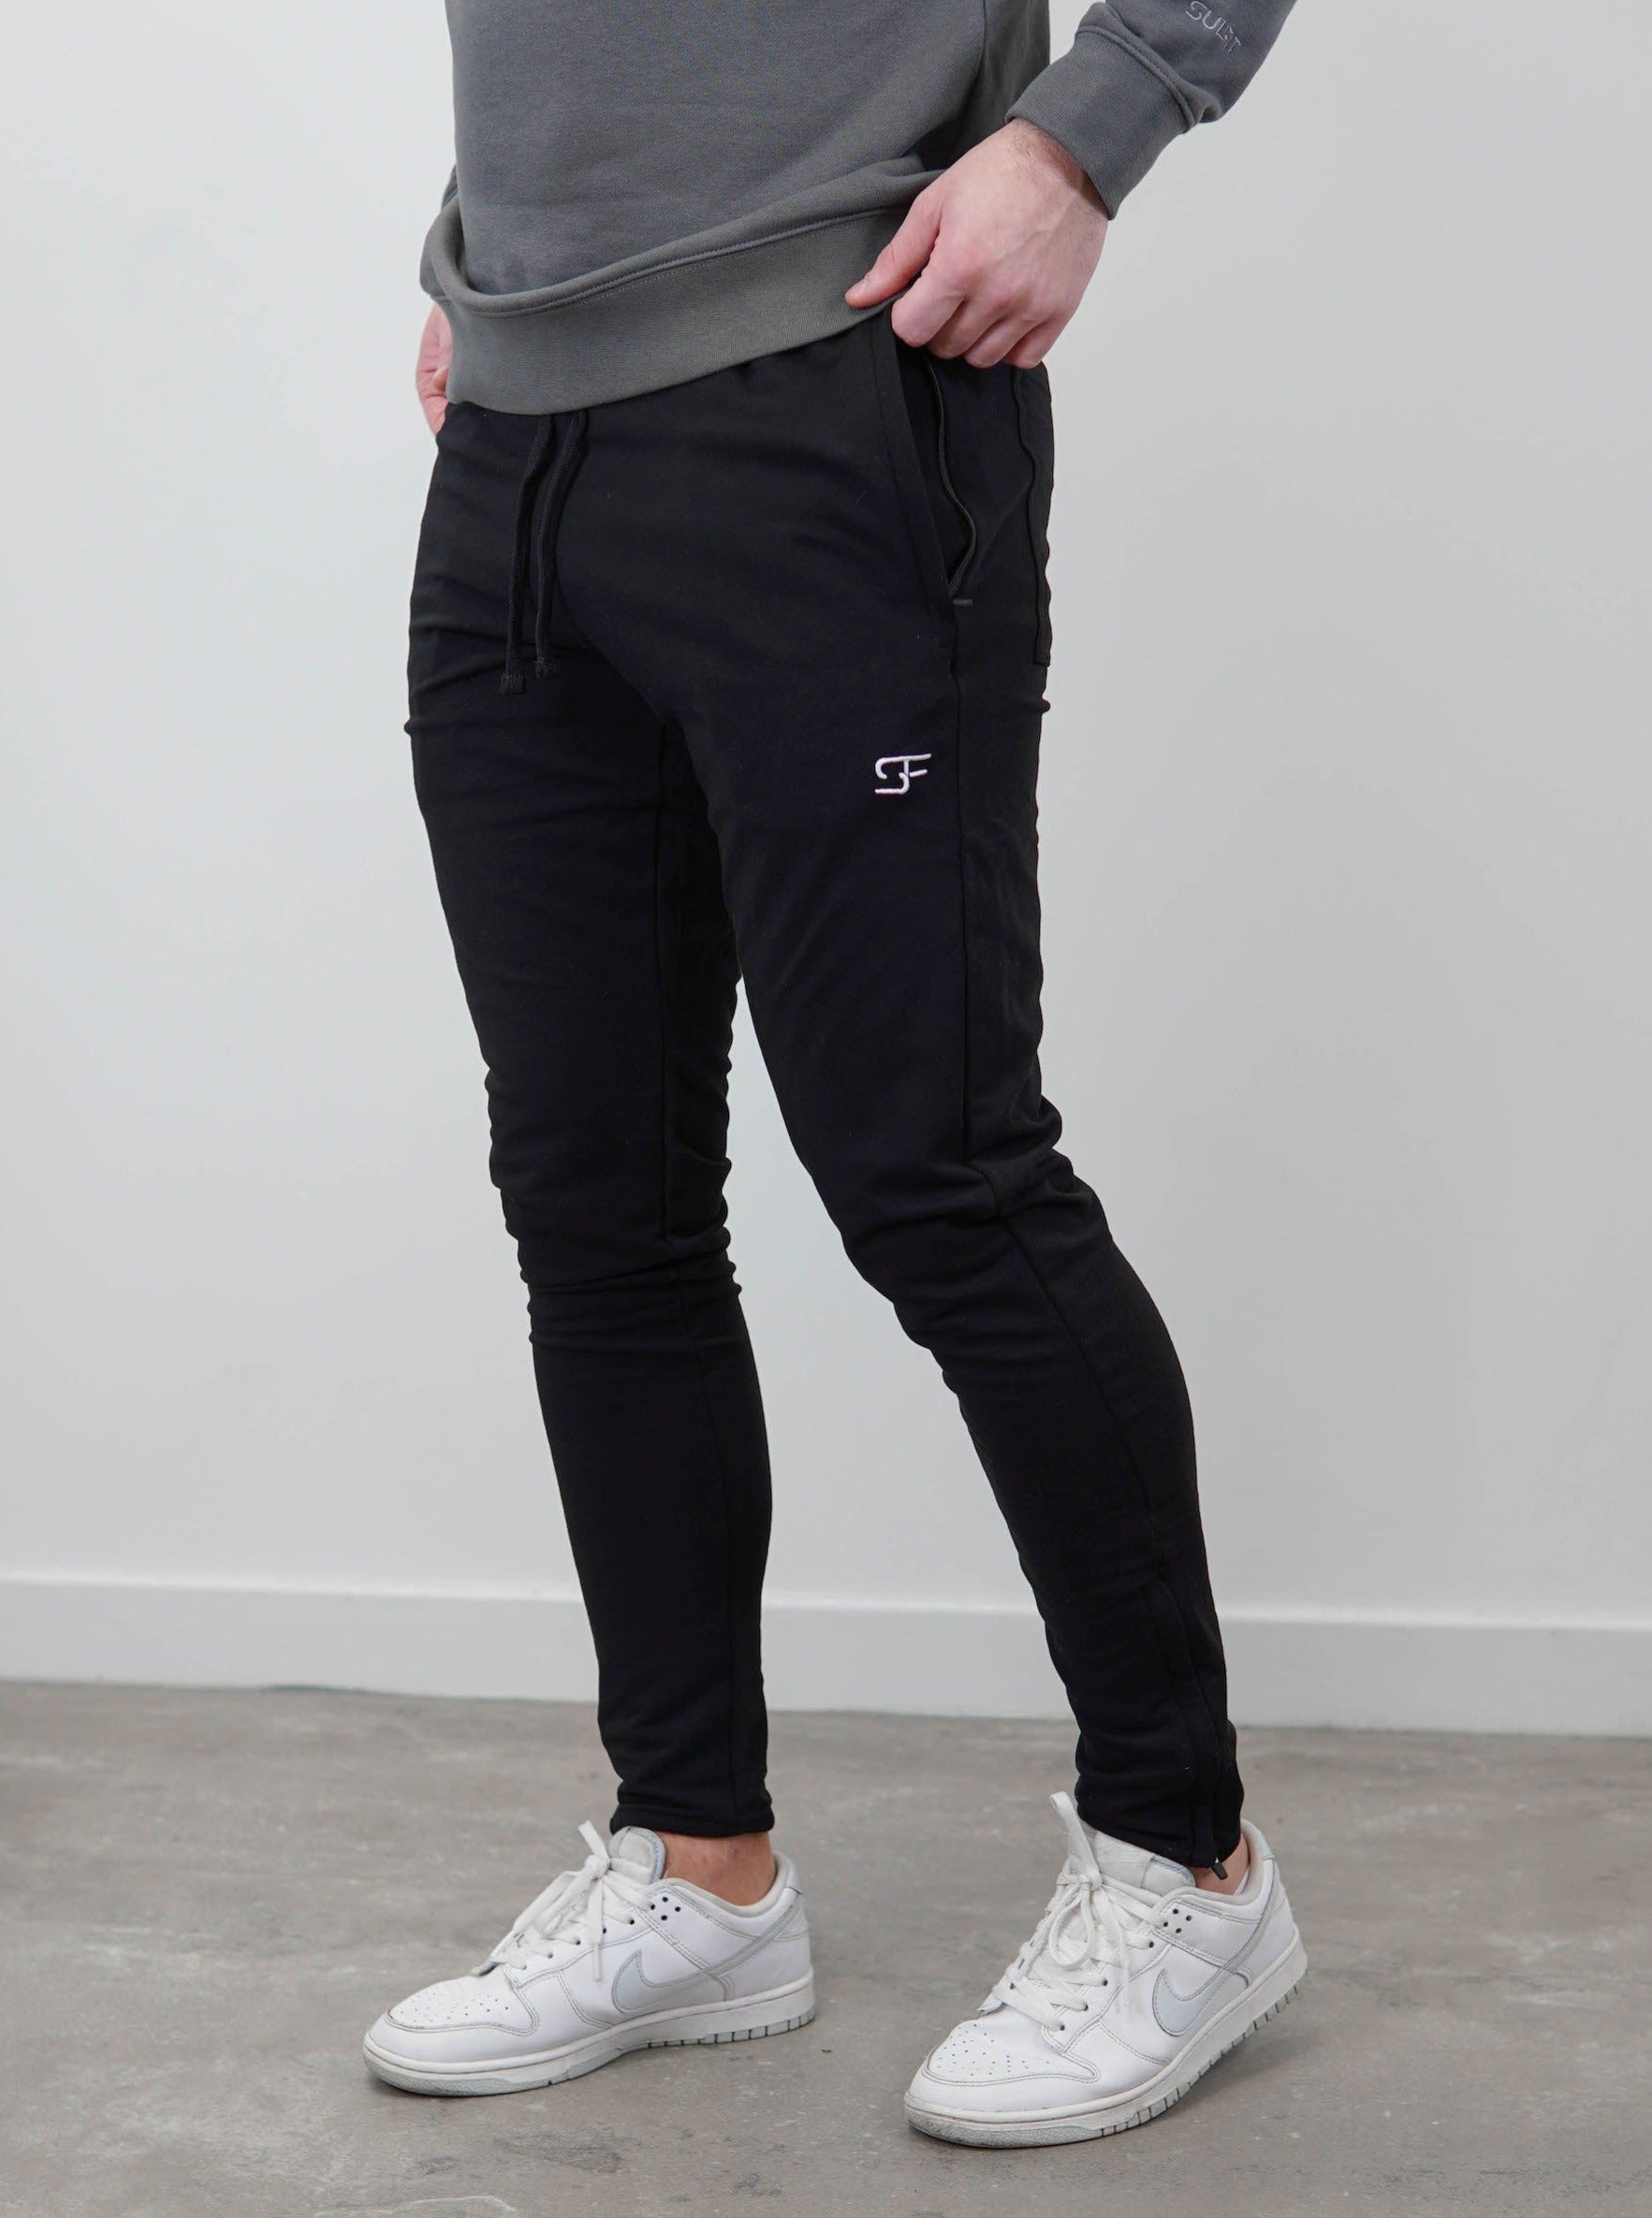 Aura Slim Fit Joggers In Black/White – Sulfit Clothing